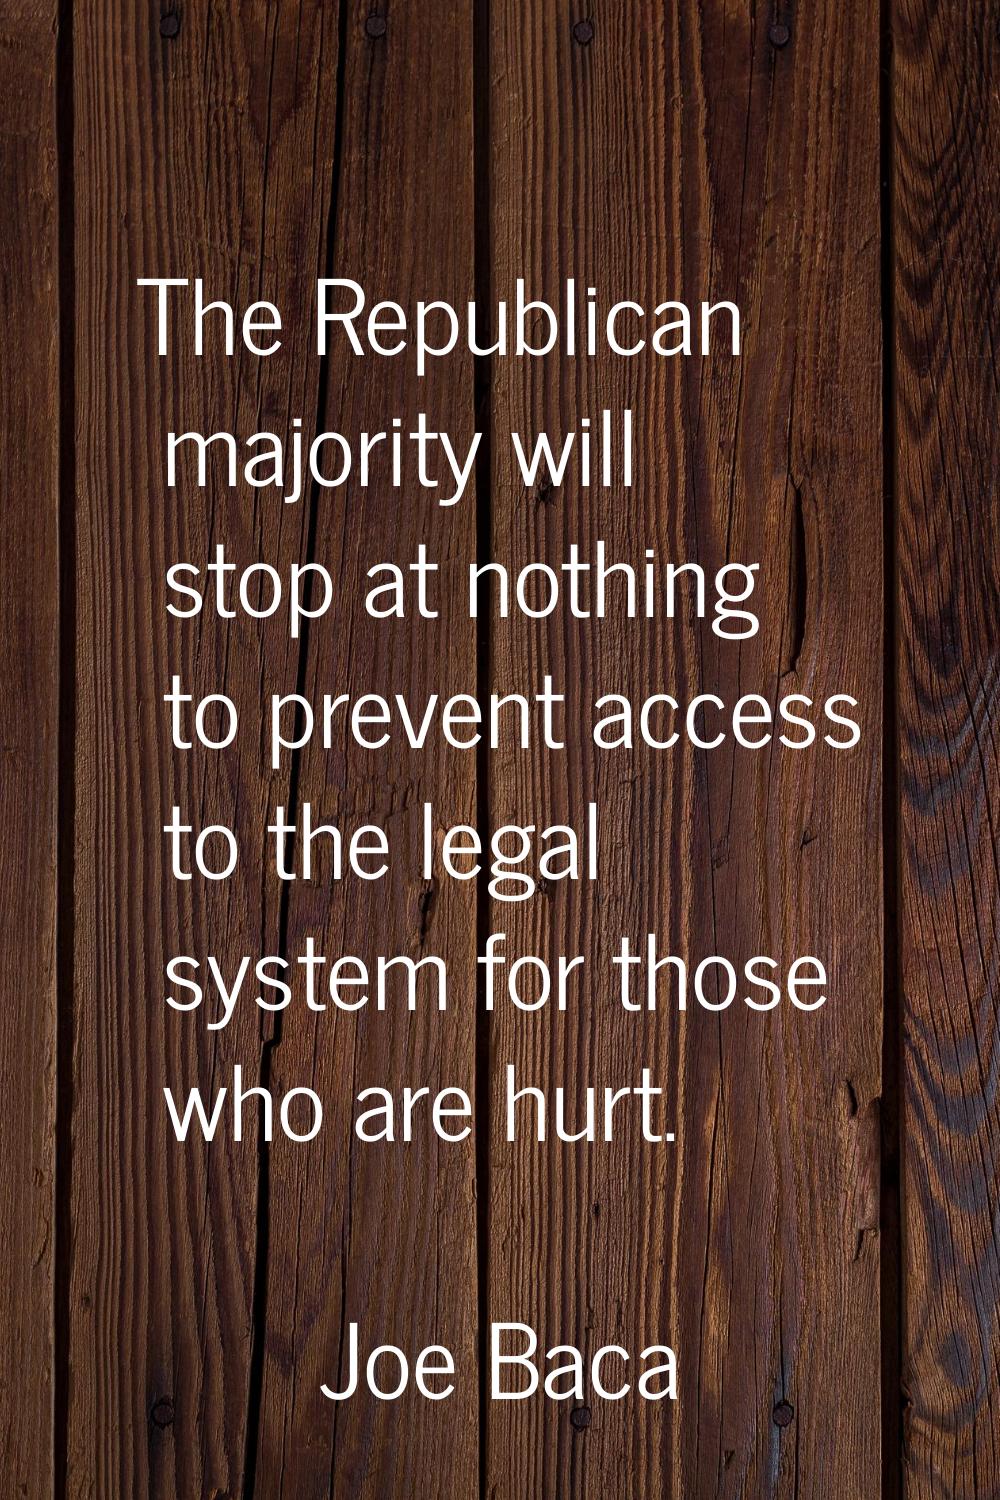 The Republican majority will stop at nothing to prevent access to the legal system for those who ar